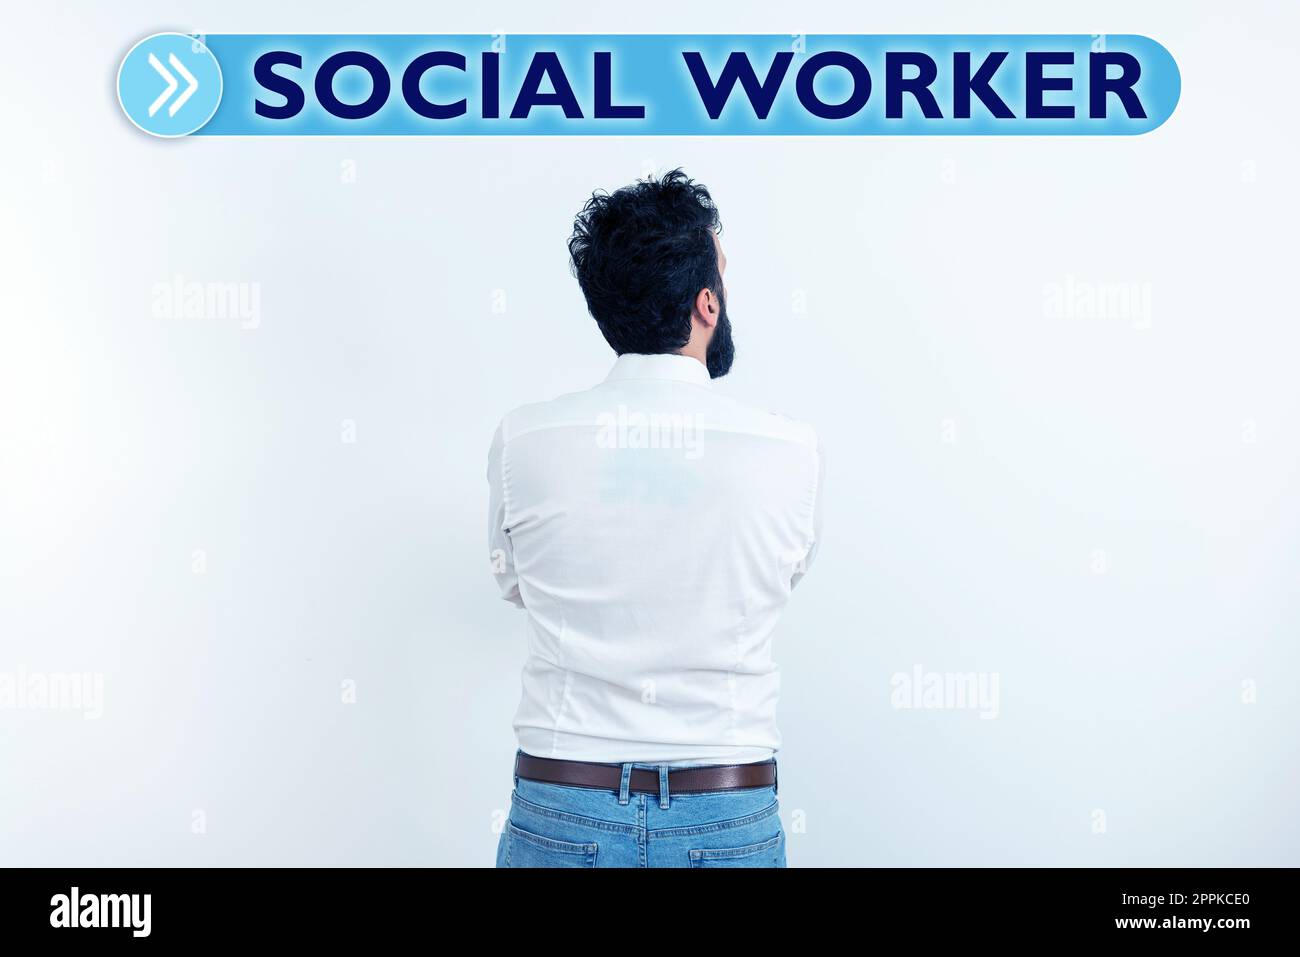 Sign displaying Social Worker. Business showcase assistance from state people with inadequate or no income Stock Photo